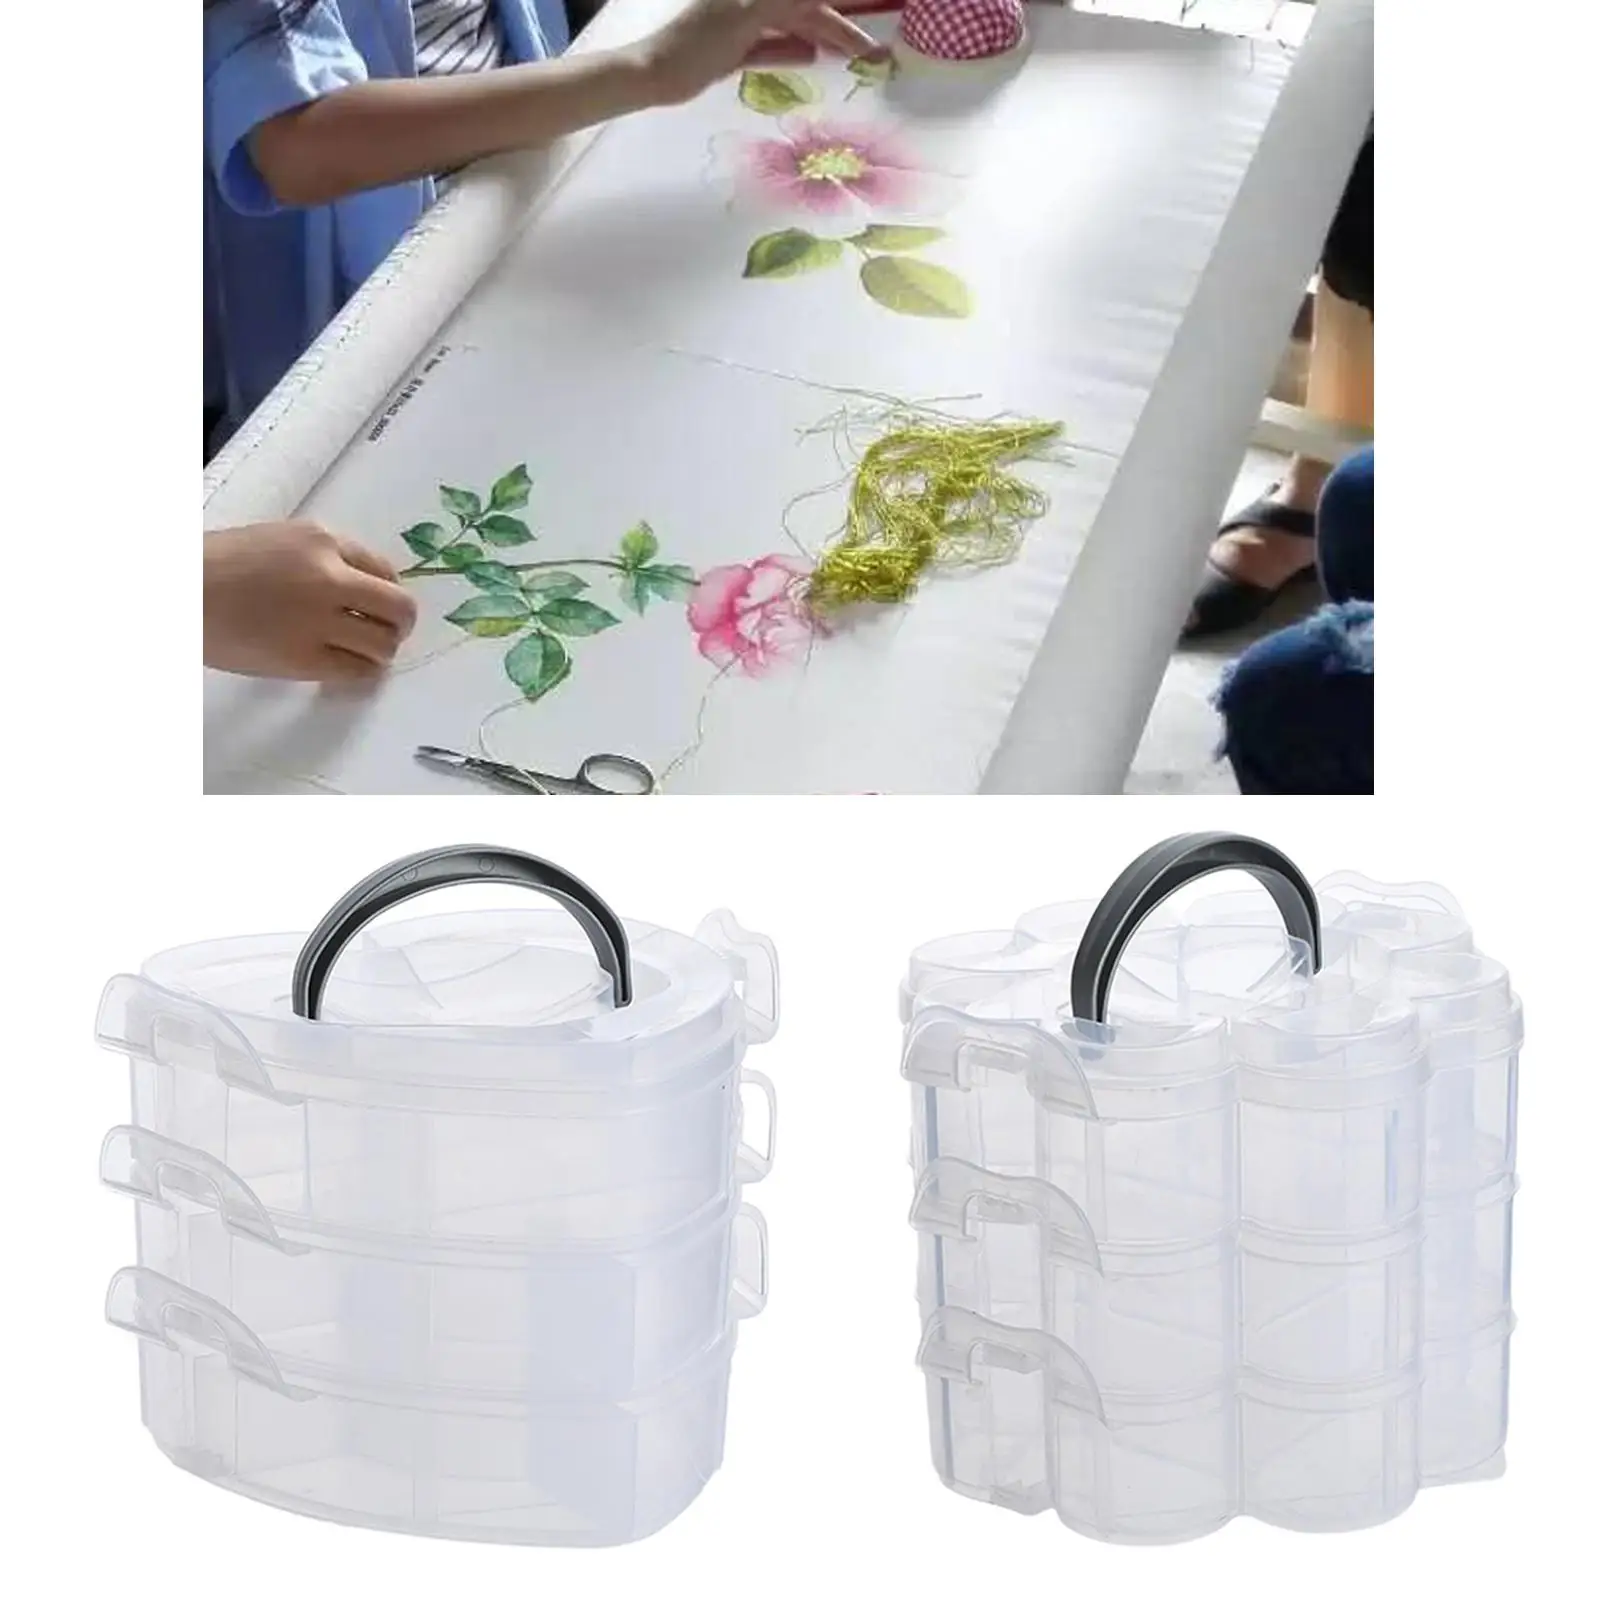  for Kids, Portable Storage Box, Sewing Box, Tool Box for Kids` Toys, Adults , Office Supply